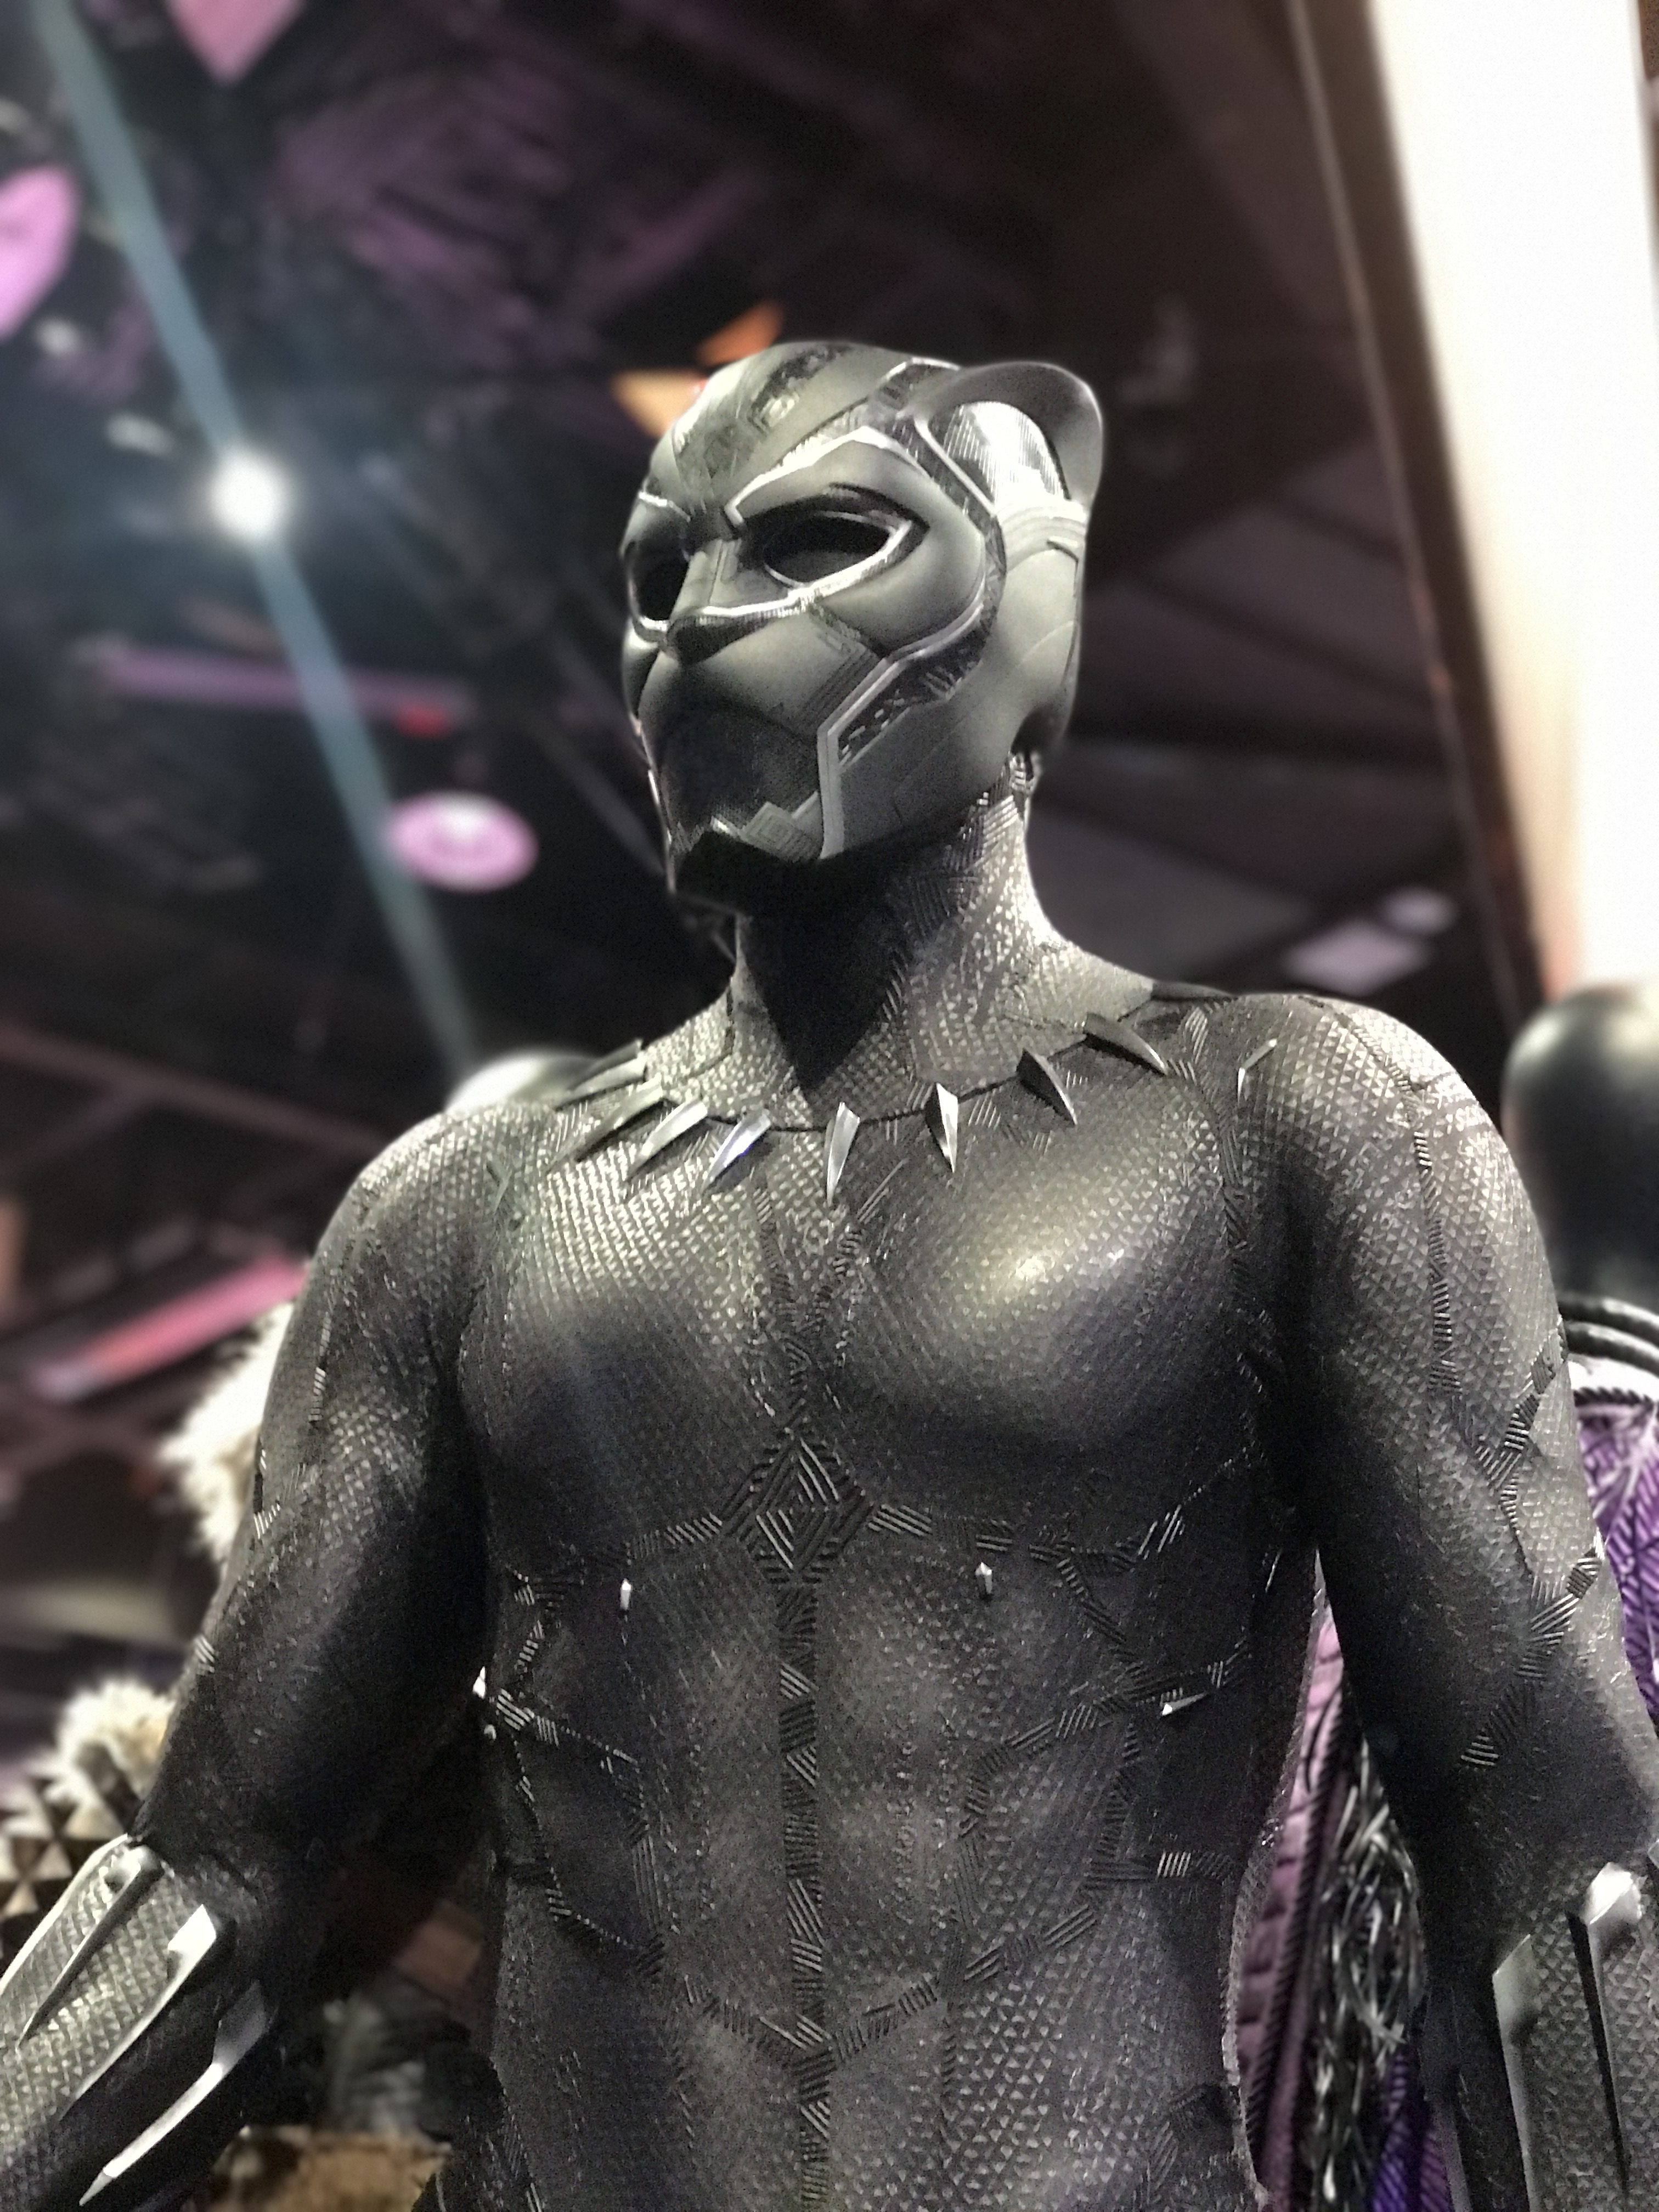 Black Panther Costume Showcase from D23 Expo